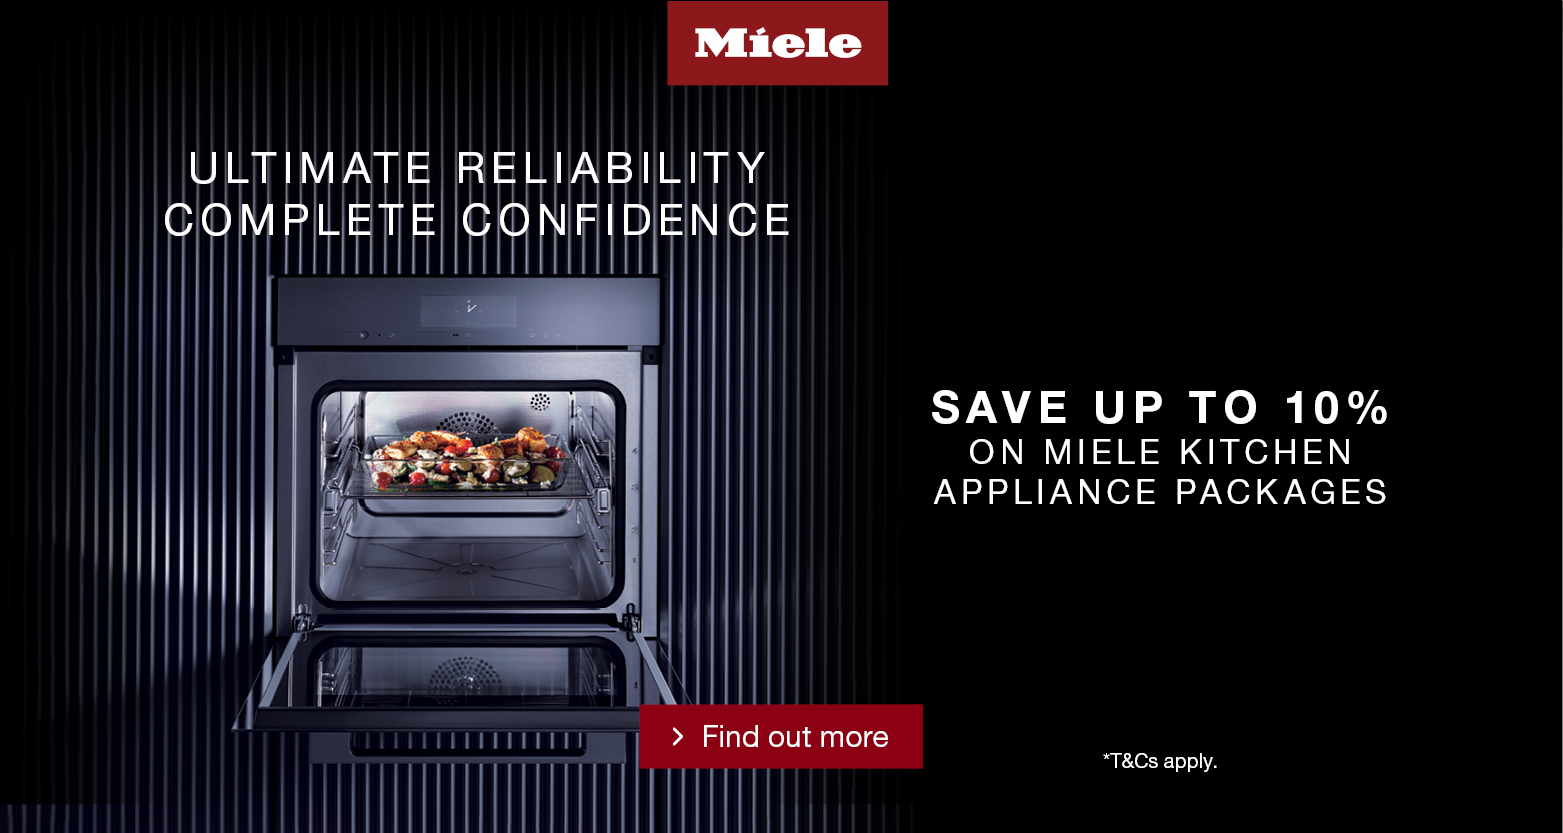 Save up to 10% on Miele Kitchen Appliance Packages at Elite Appliances